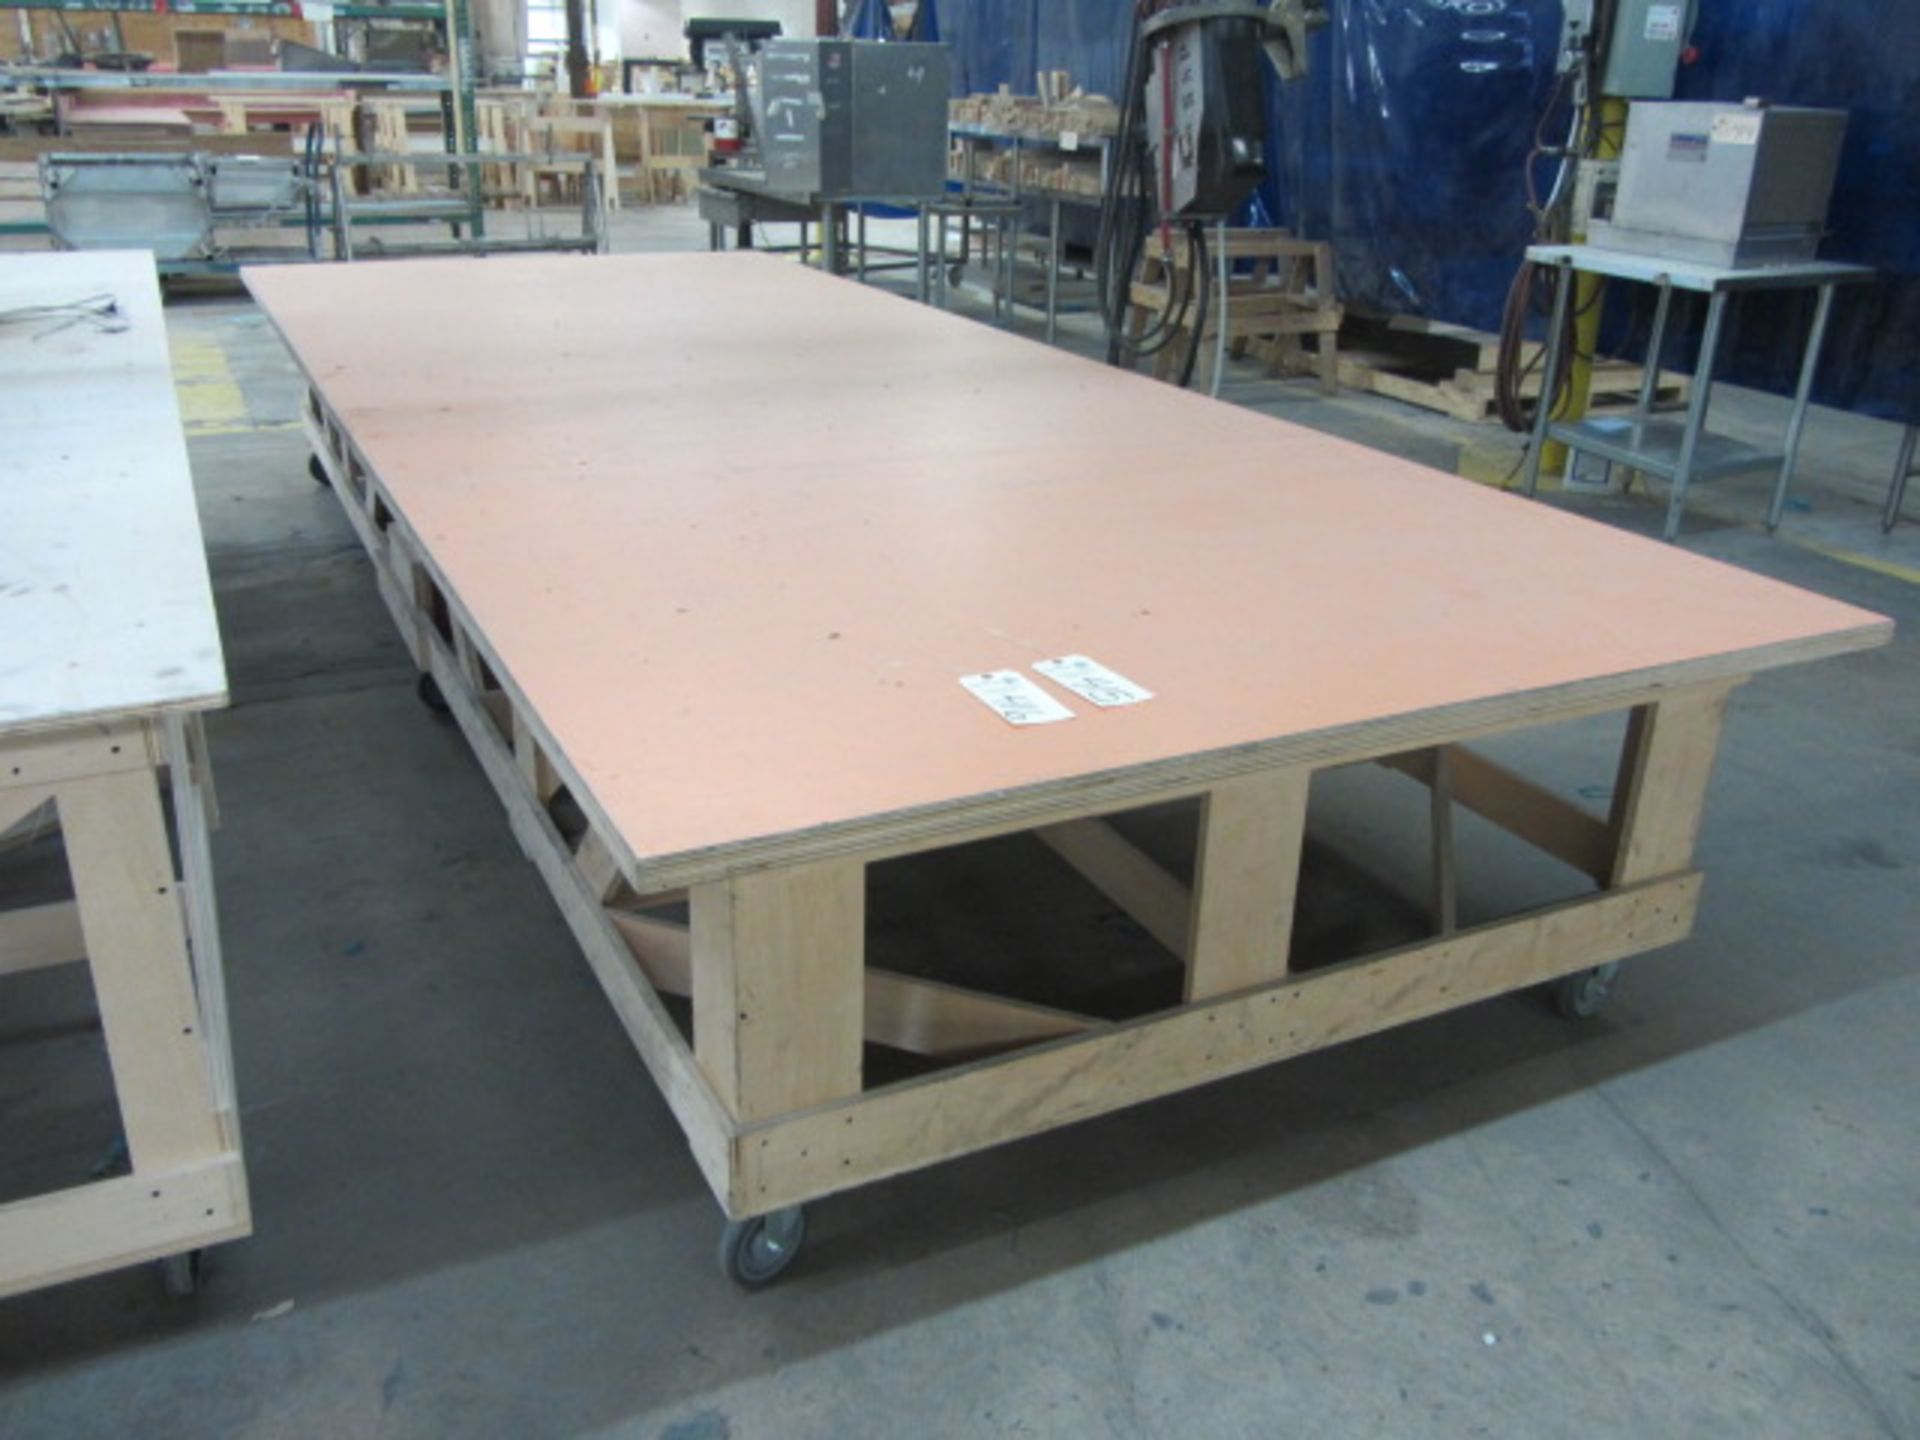 6' x 15' Portable Wood Layout Table